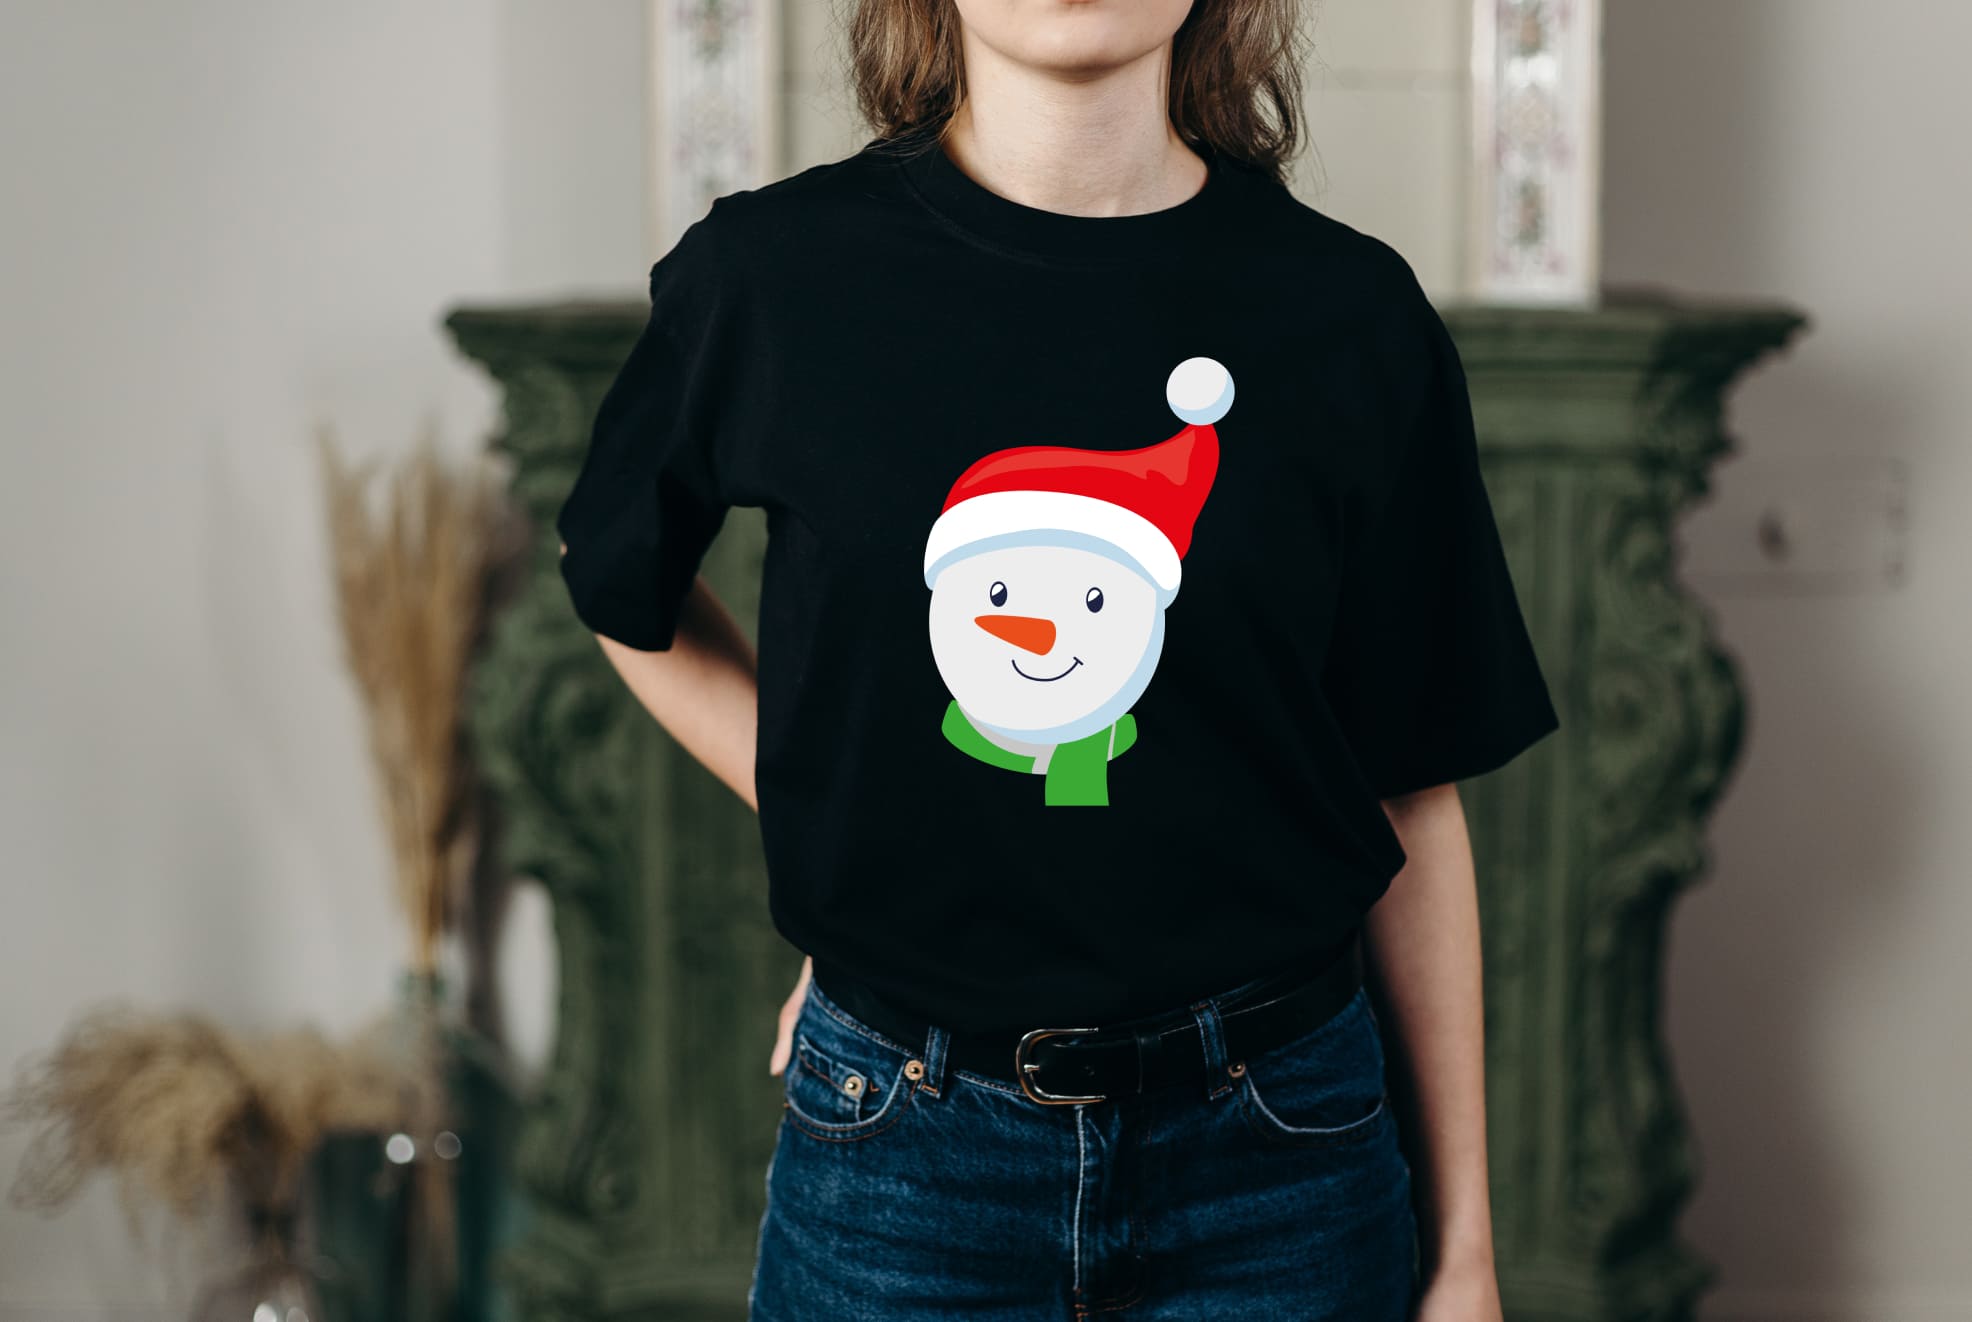 Black t-shirt with the snowman face.